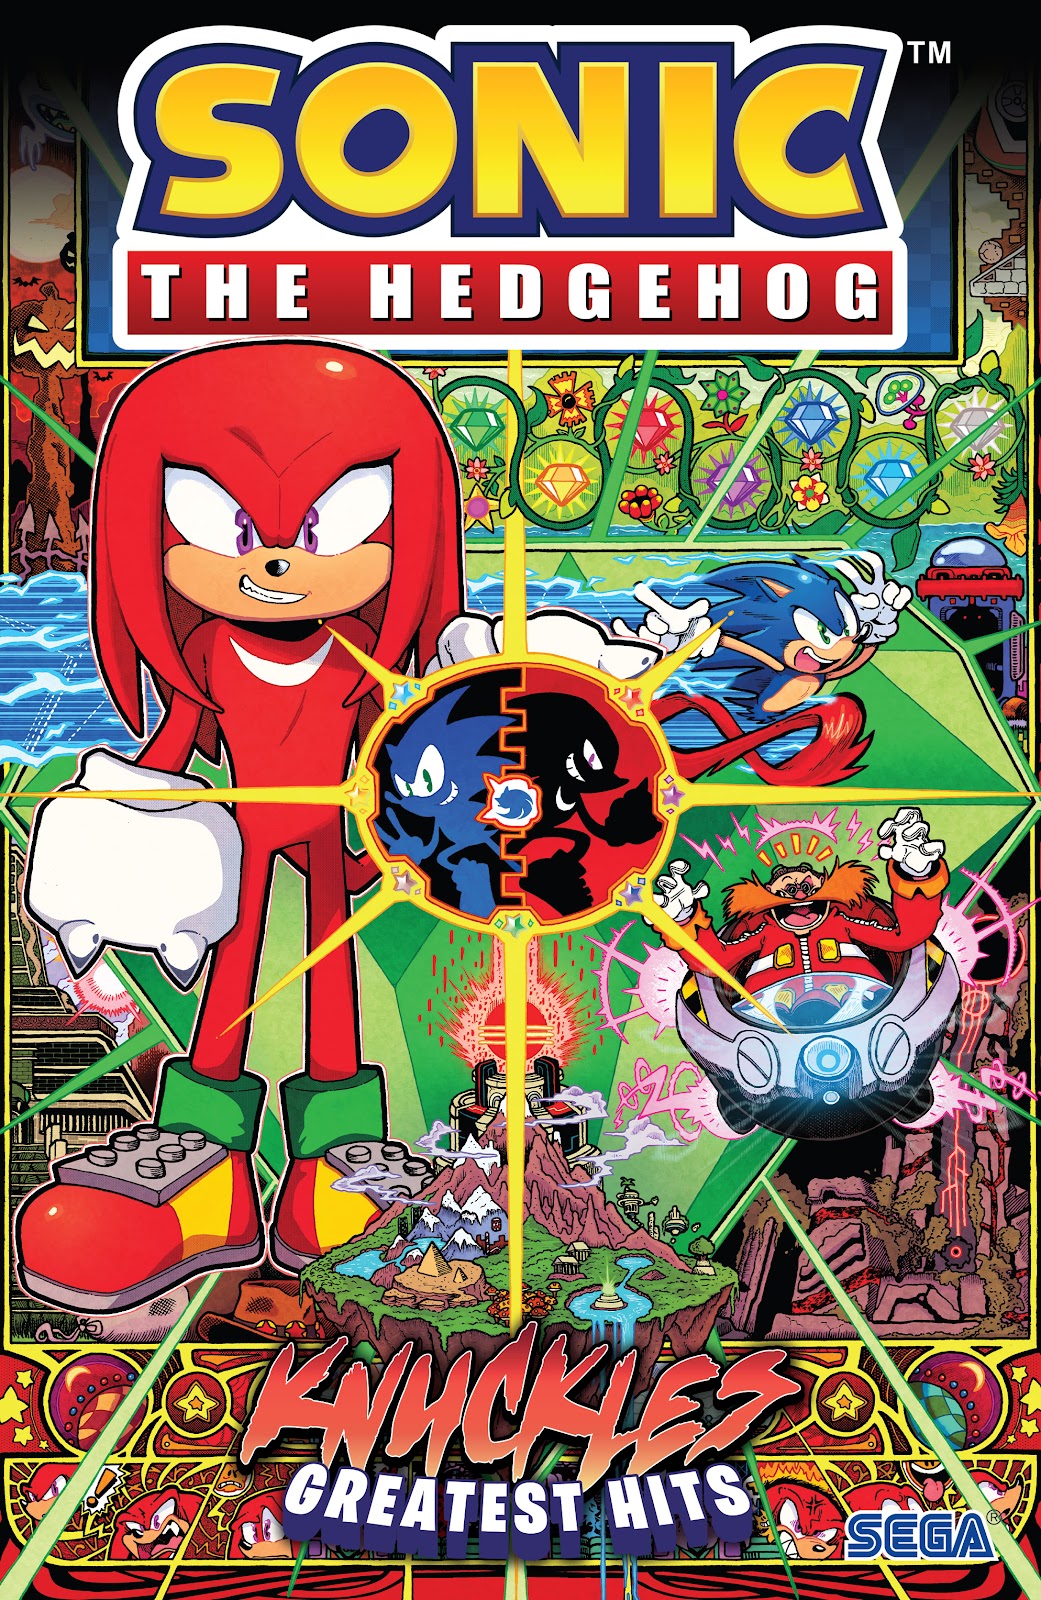 Sonic the Hedgehog: Knuckles' Greatest Hits TPB Page 1